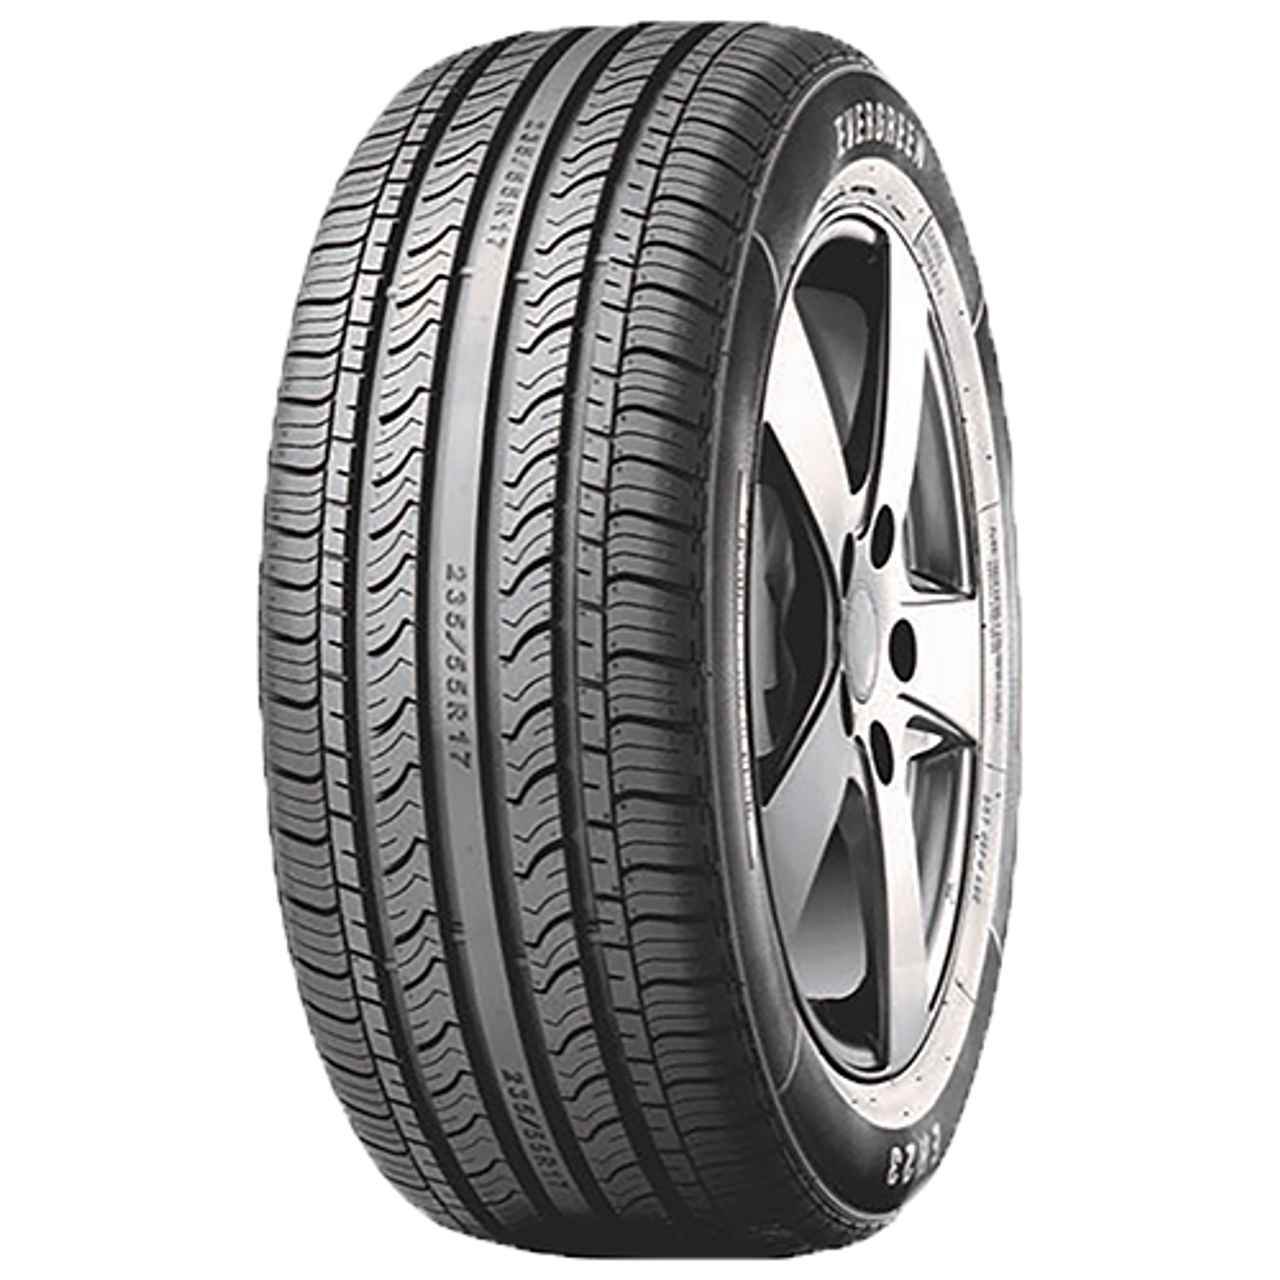 EVERGREEN EH23 195/60R15 88V BSW